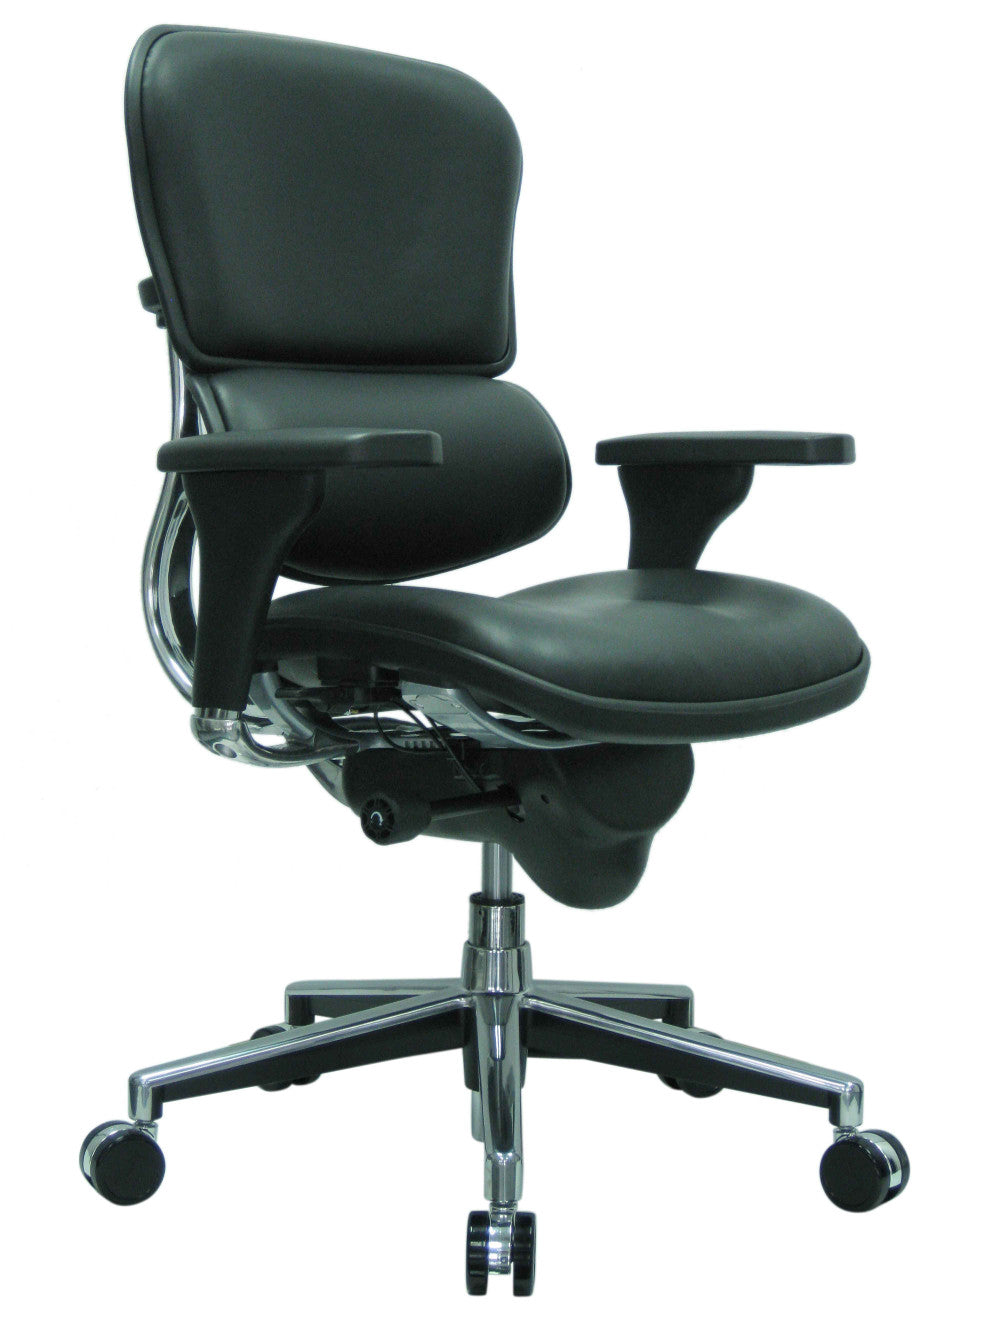 Eurotech Ergohuman Mid Back Leather Chair - Black Seating-Ergonomic Chair - Office Ready